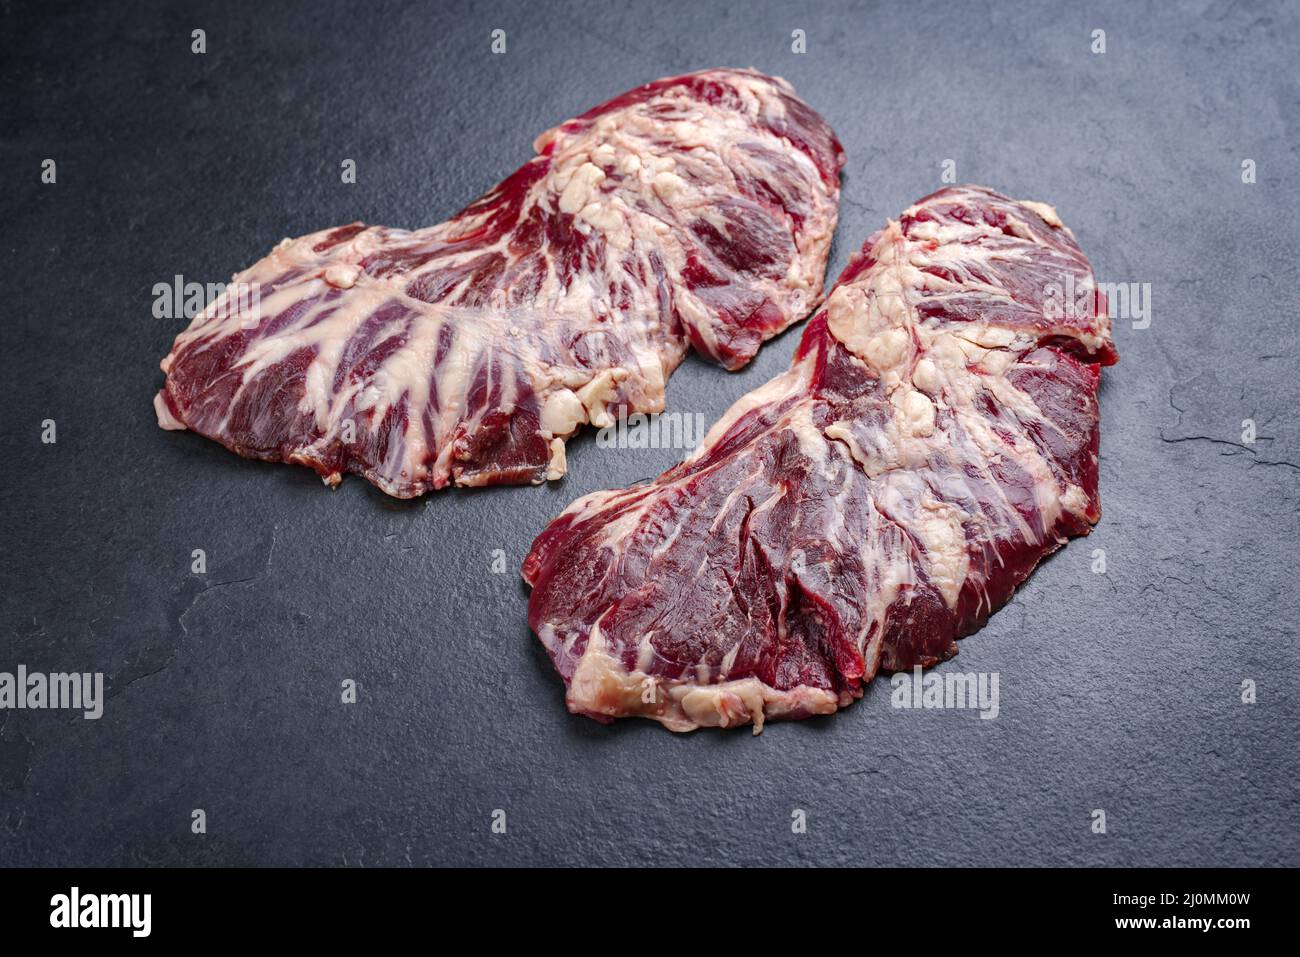 Raw wagyu spider beef steak offered as close-up on a black board with copy space Stock Photo